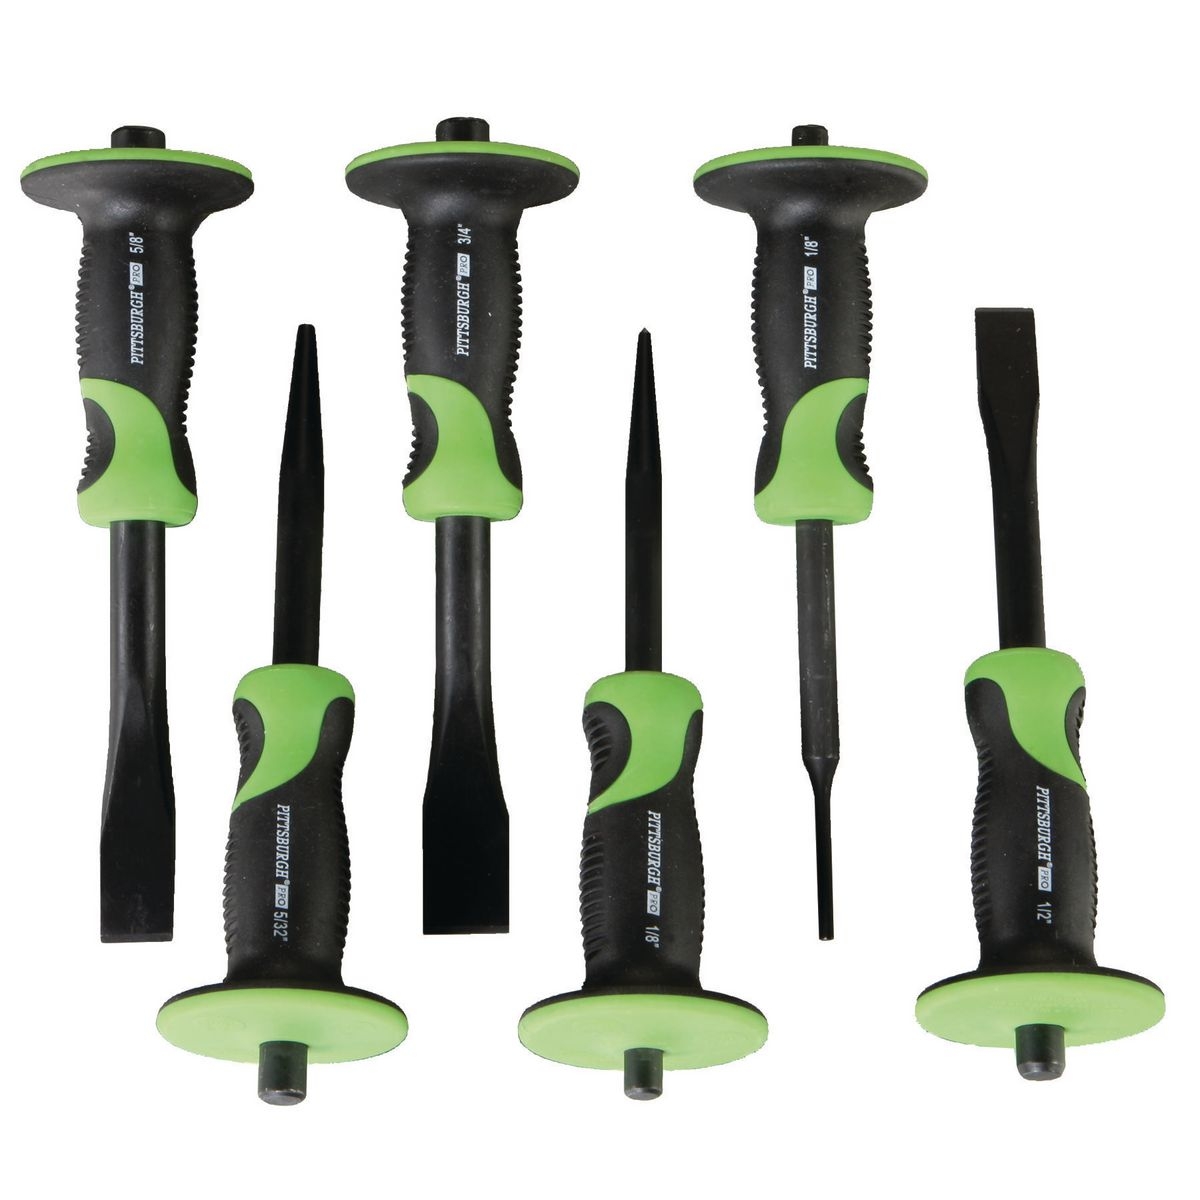 PITTSBURGH Punch and Chisel Set 6 Pc. - Item 94389 / 56591